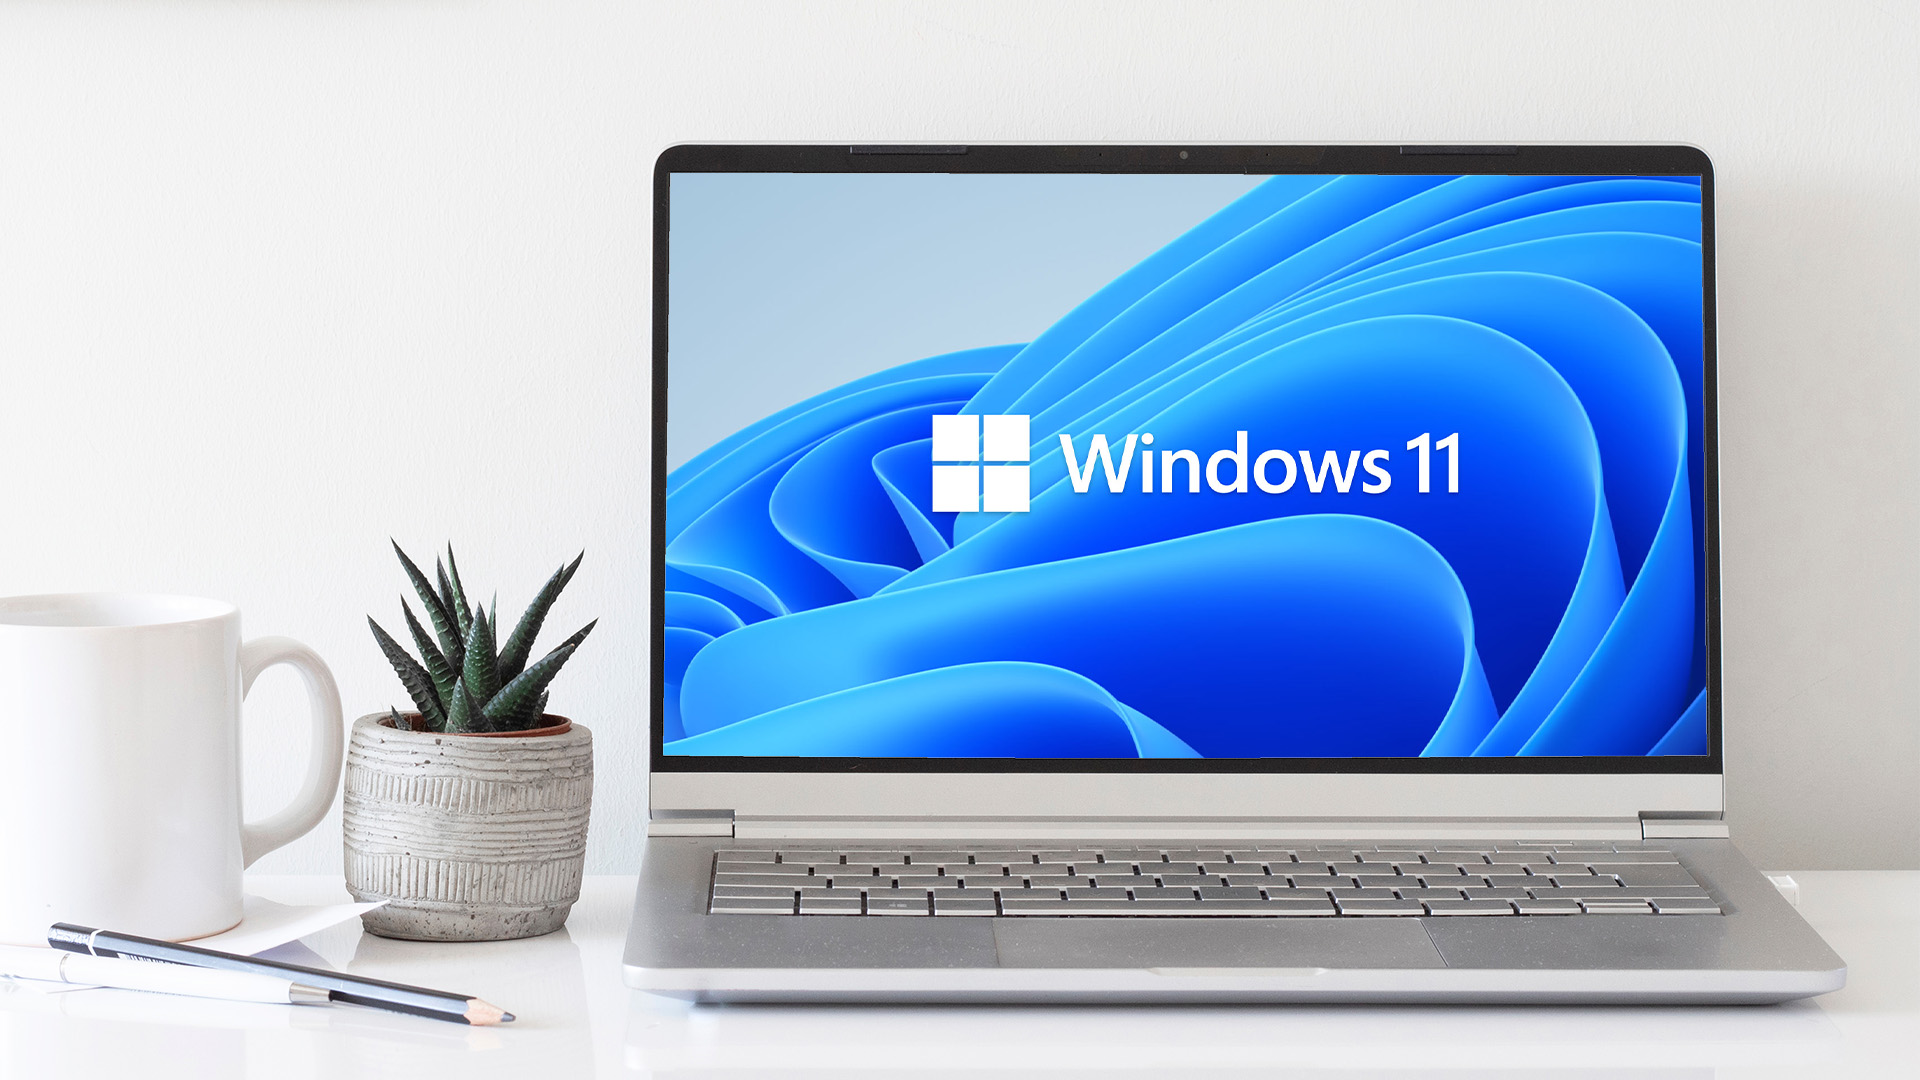 What to expect with Windows 11